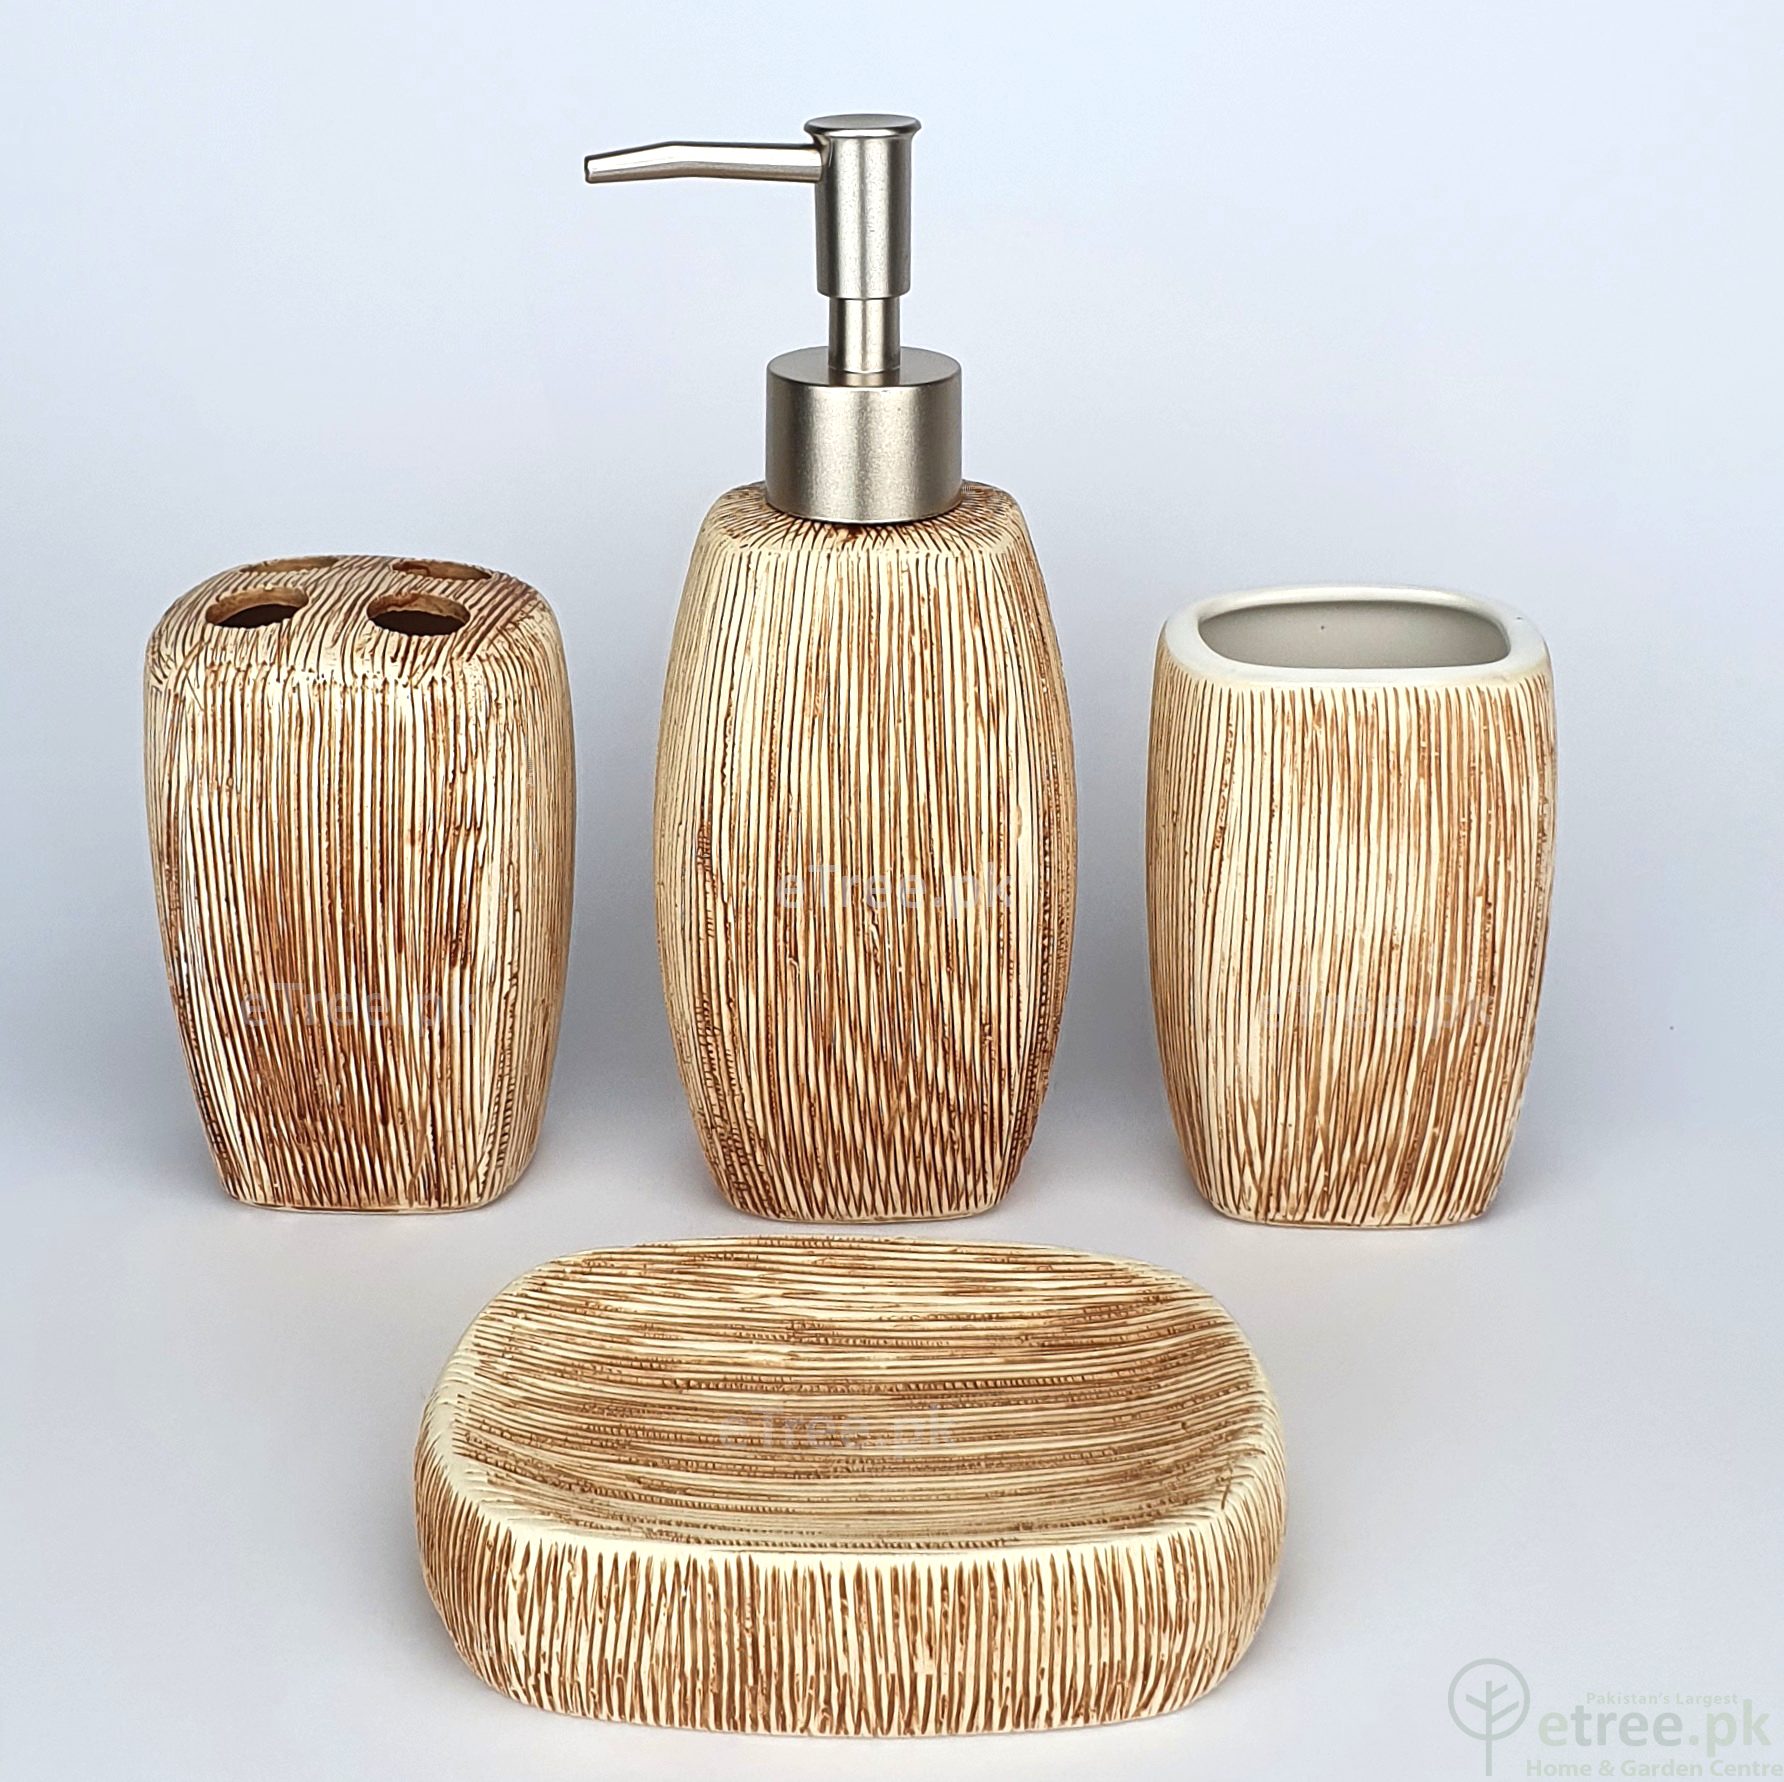 Dirt (By MontBeau France) - Set of 4 - Bathroom Accessories Set - eTree.pk